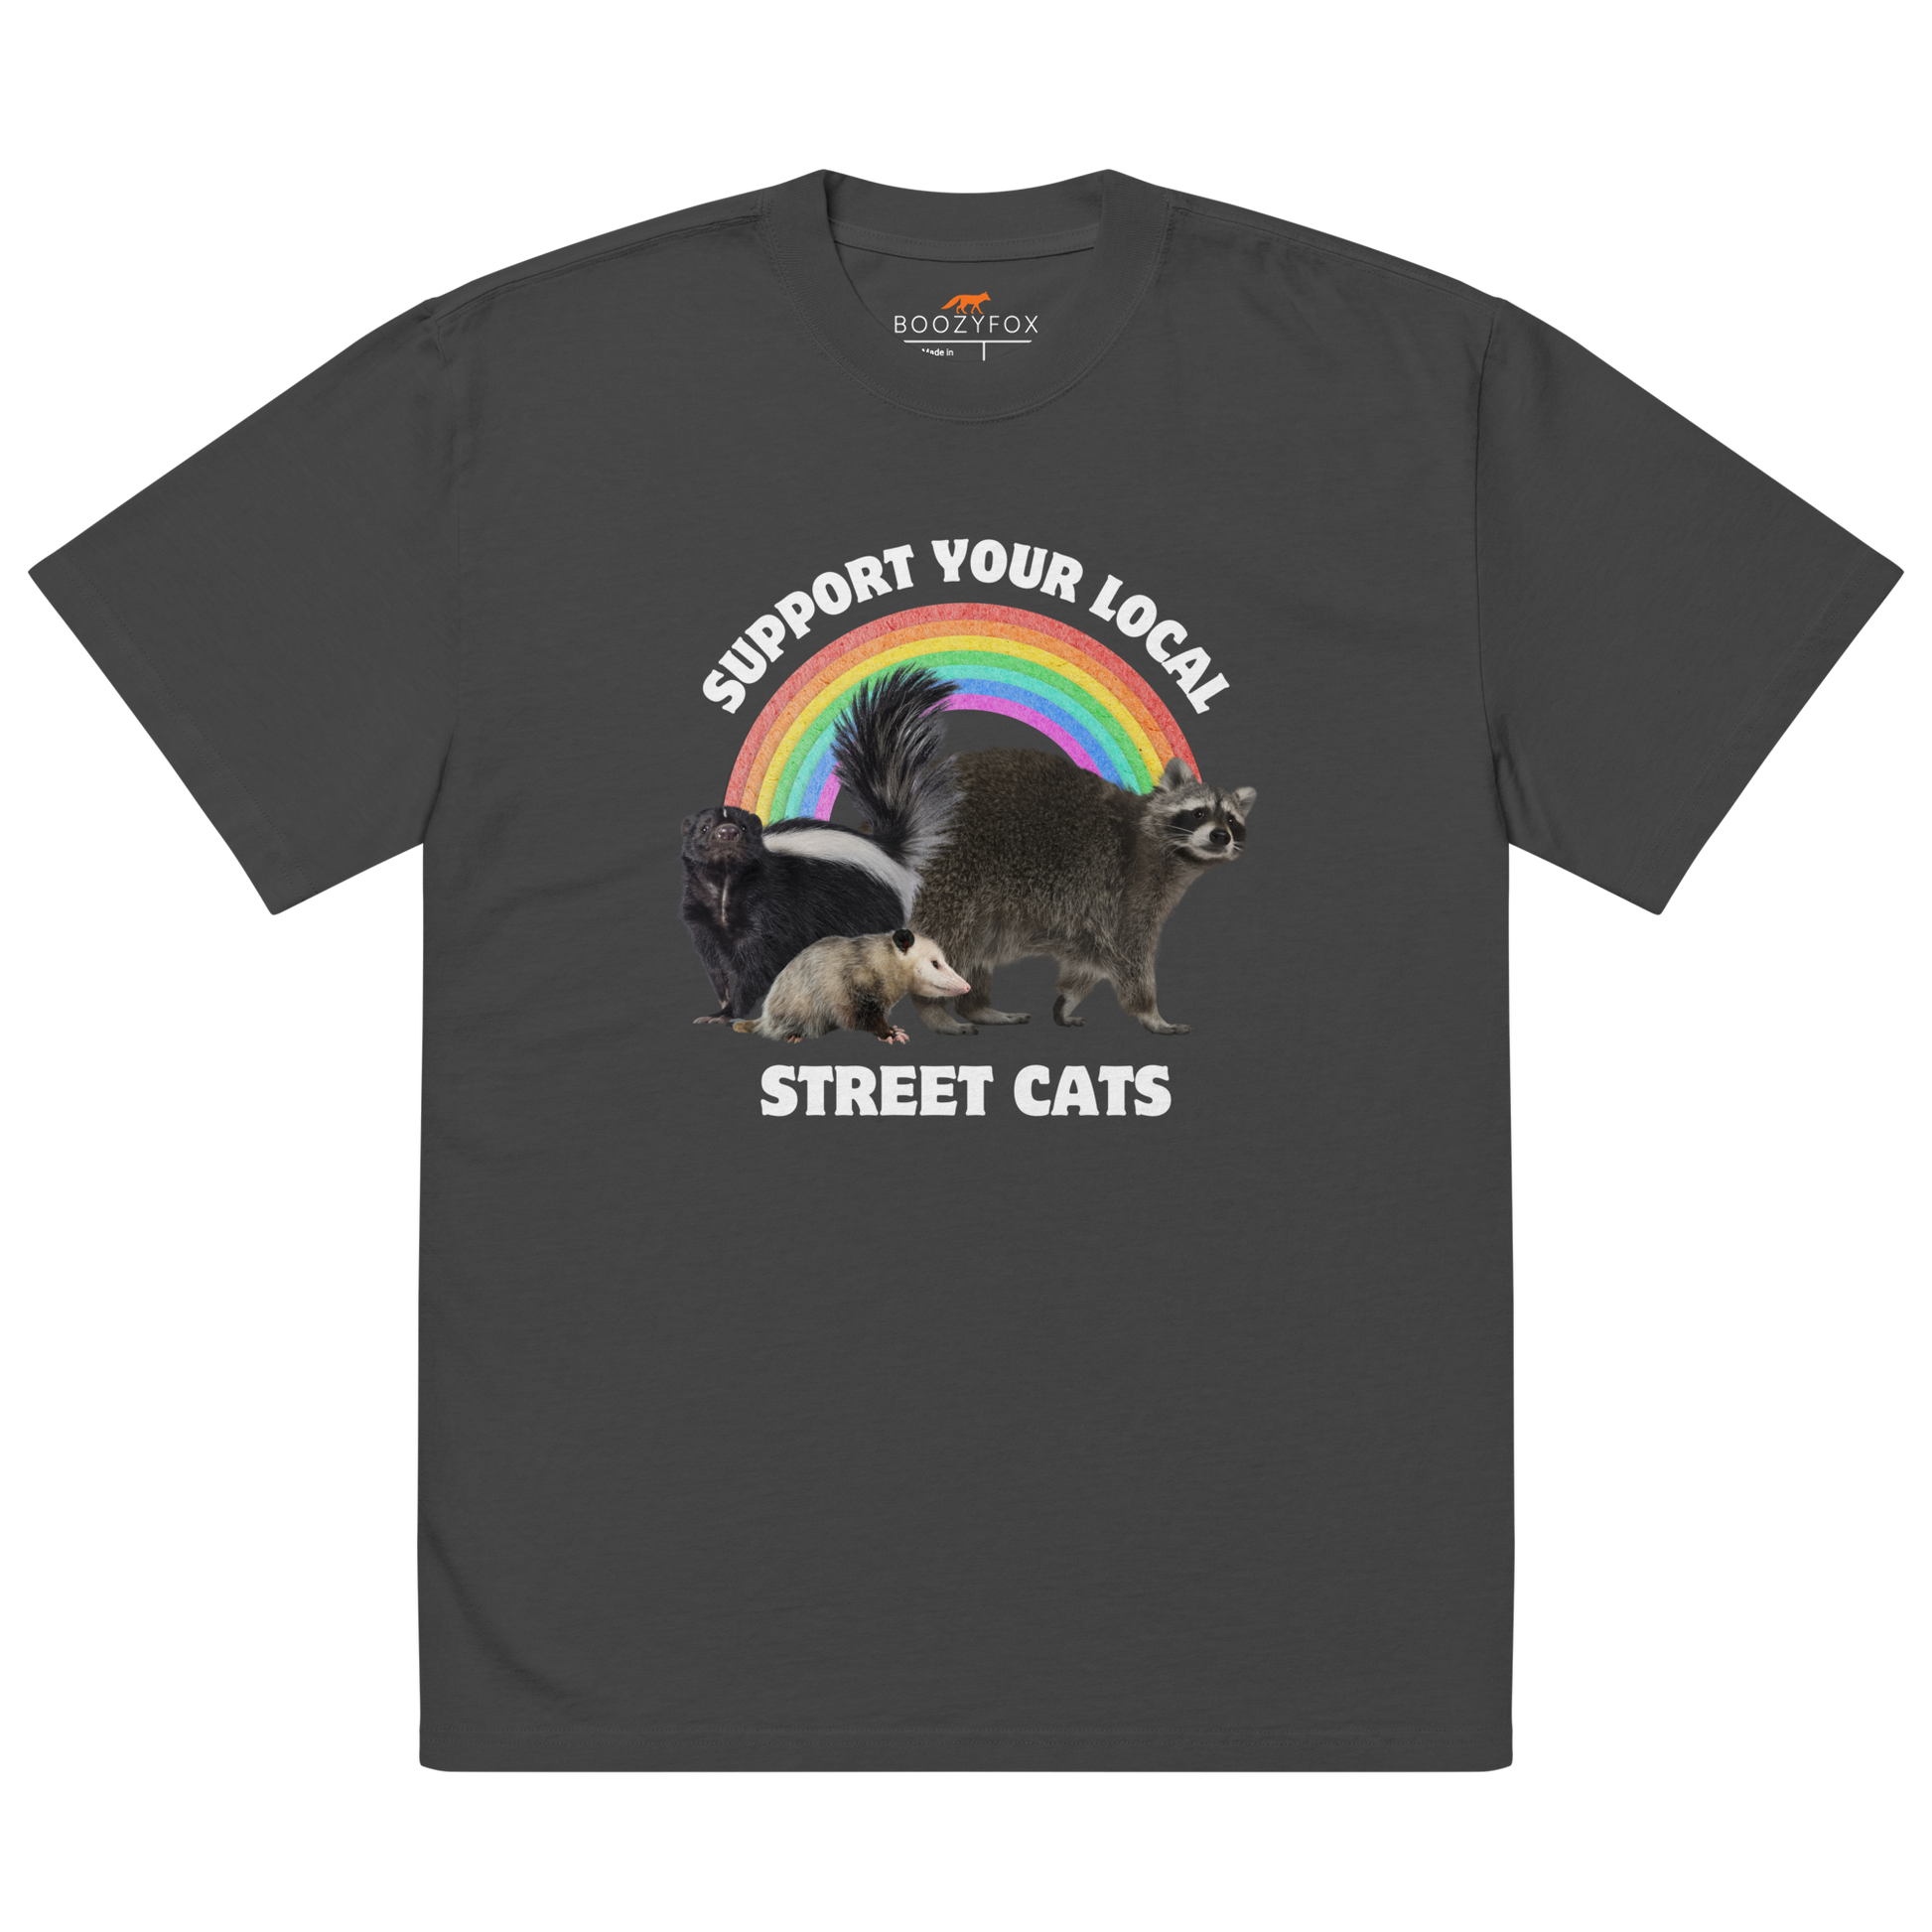 Faded Black Street Cats Oversized T-Shirt featuring a purr-fect trio – opossum, skunk, raccoon – and the Support Your Local Street Cats graphic on the chest - Funny Graphic Animal Oversized Tees - Boozy Fox